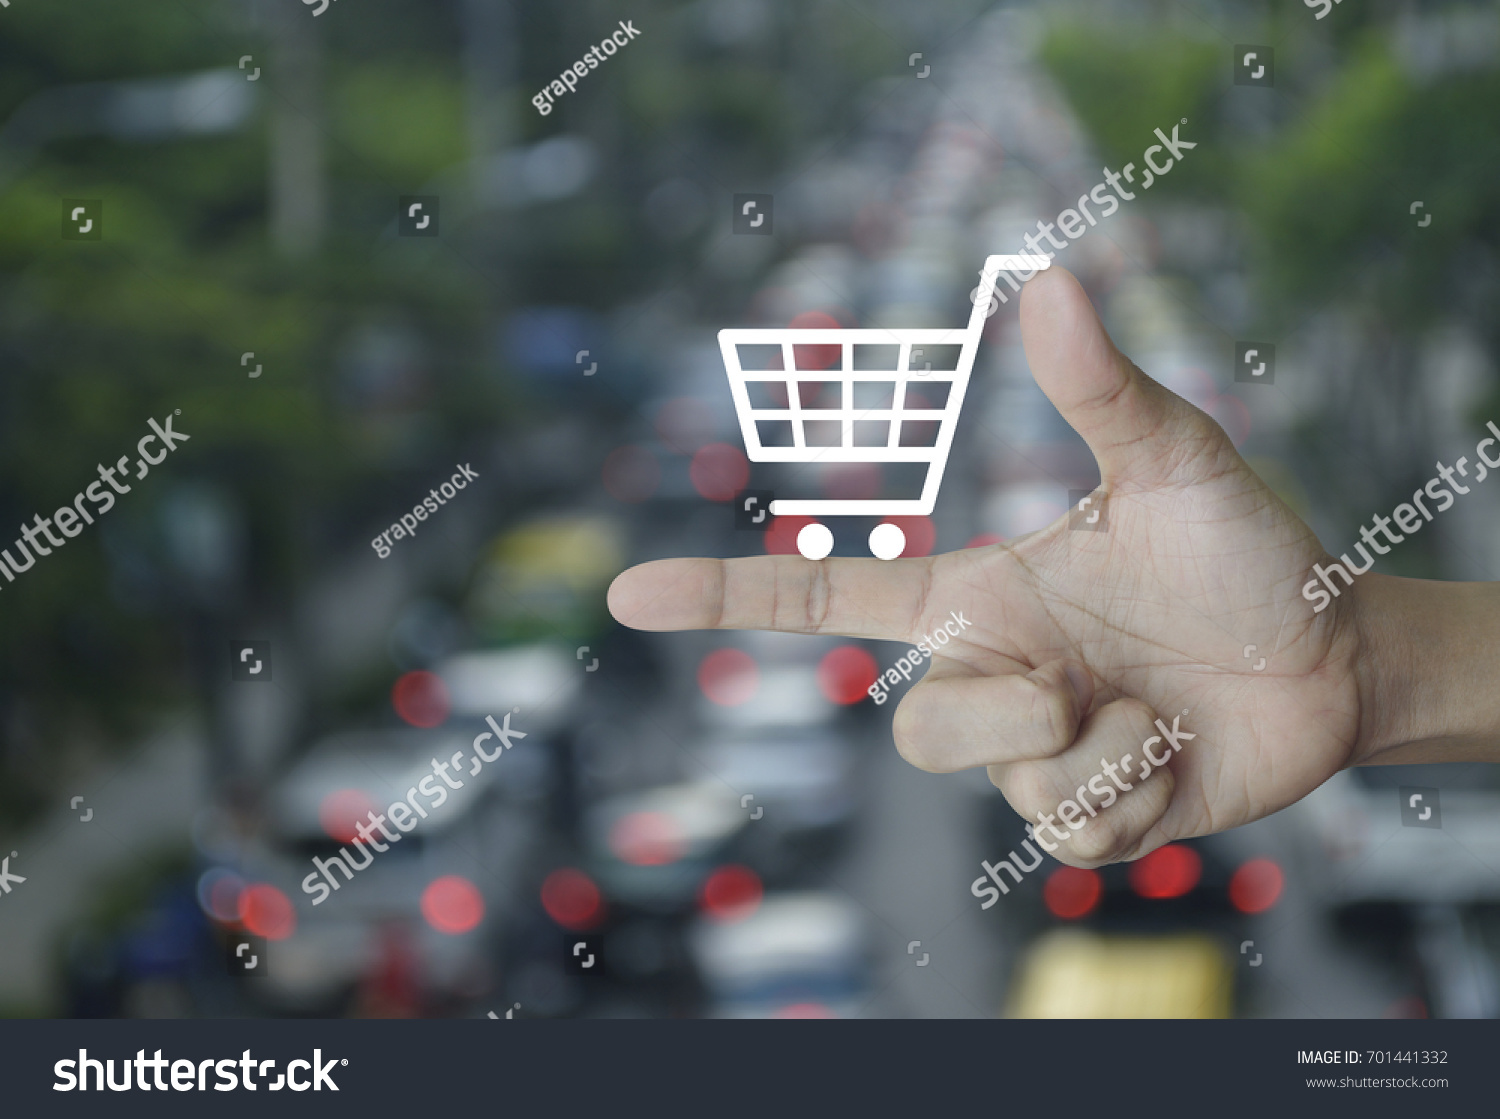 Shopping cart icon on finger over blur of rush hour with cars and road, Shop online concept #701441332